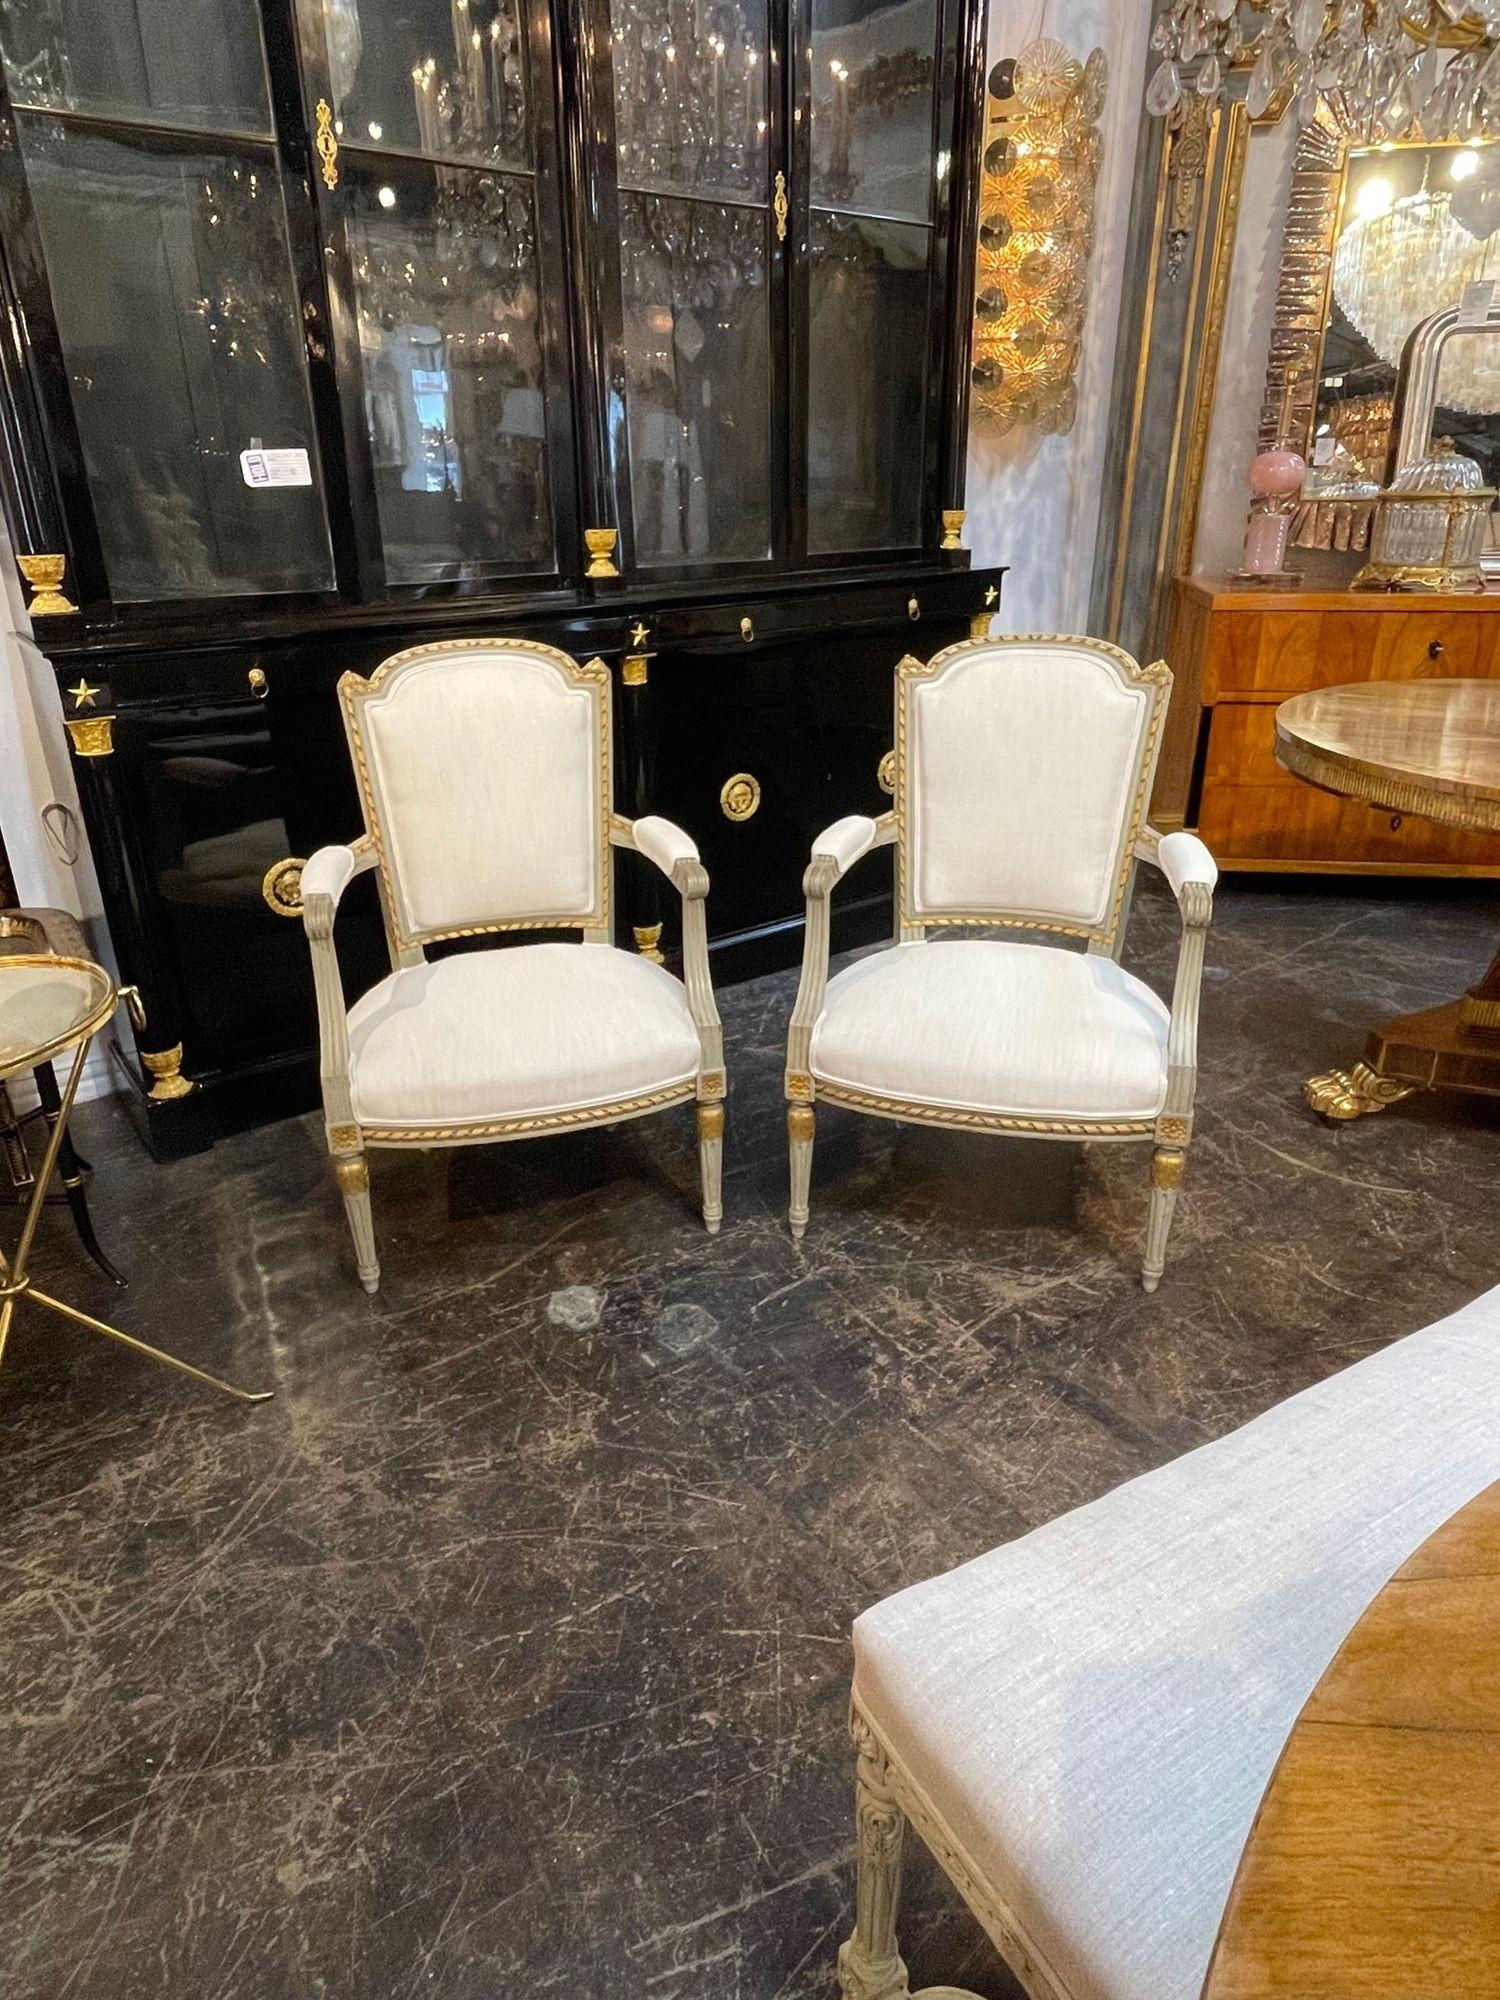 Exceptional pair of 19th century French Louis XVI carved and painted chairs with creme colored linen upholstery. Very fine carvings and beautiful patina as well. Creates an elegant look!!